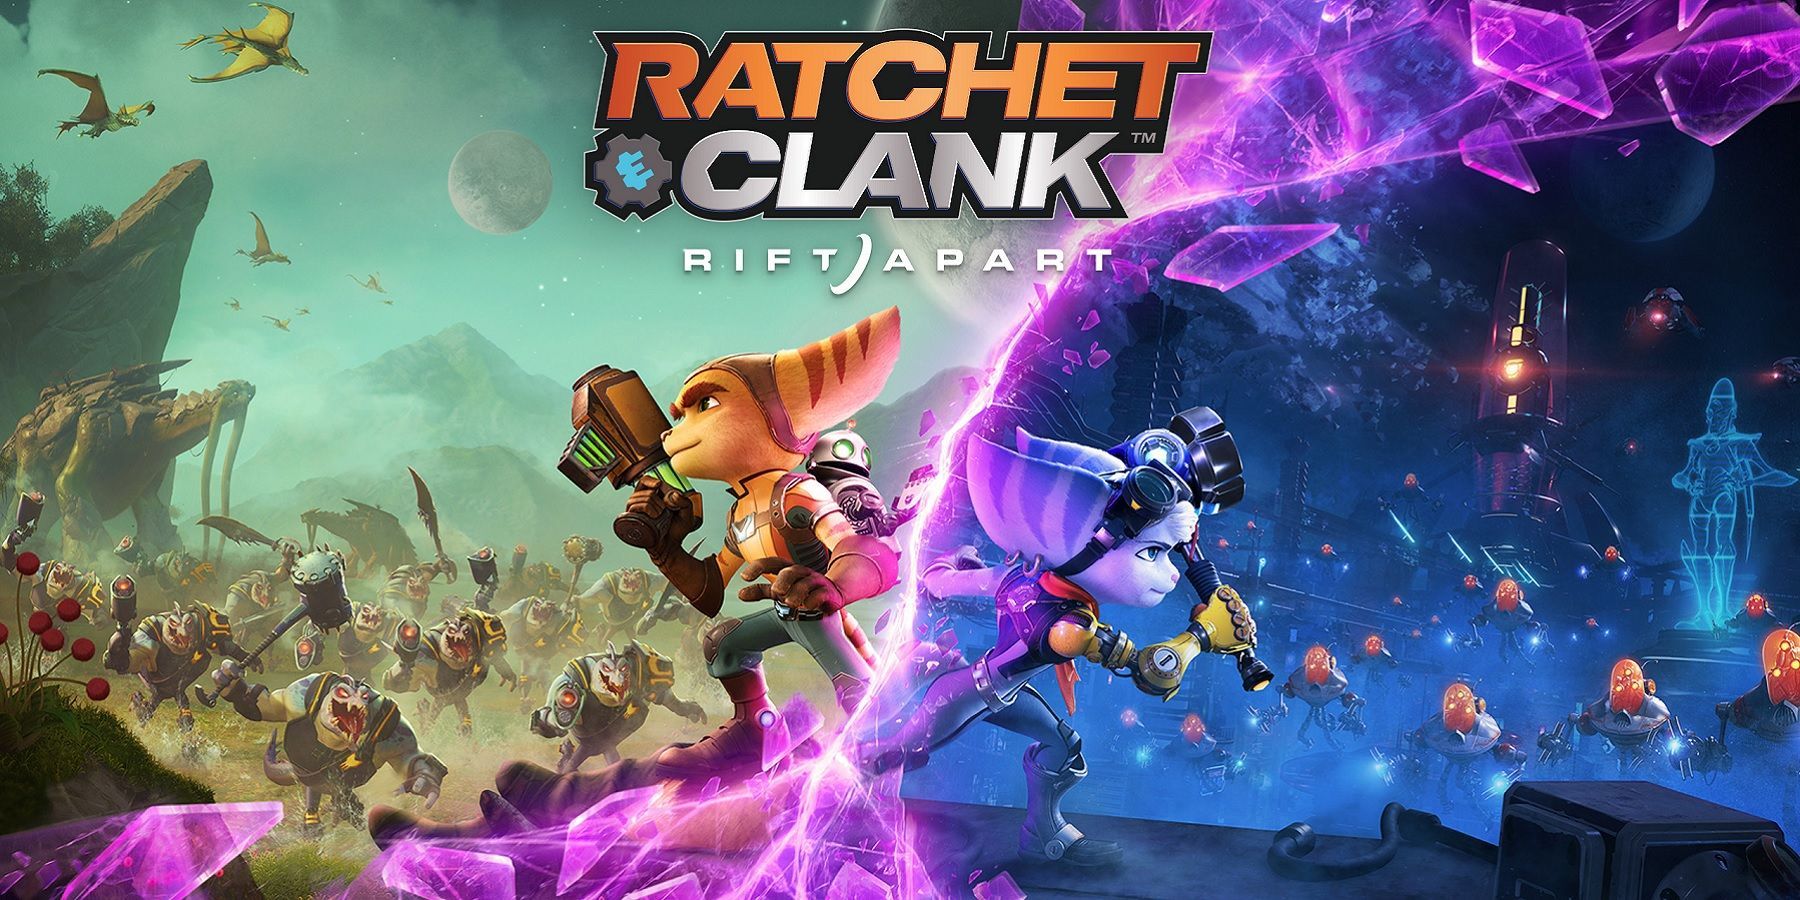 ratchet and clank rift apart PC port review bombed